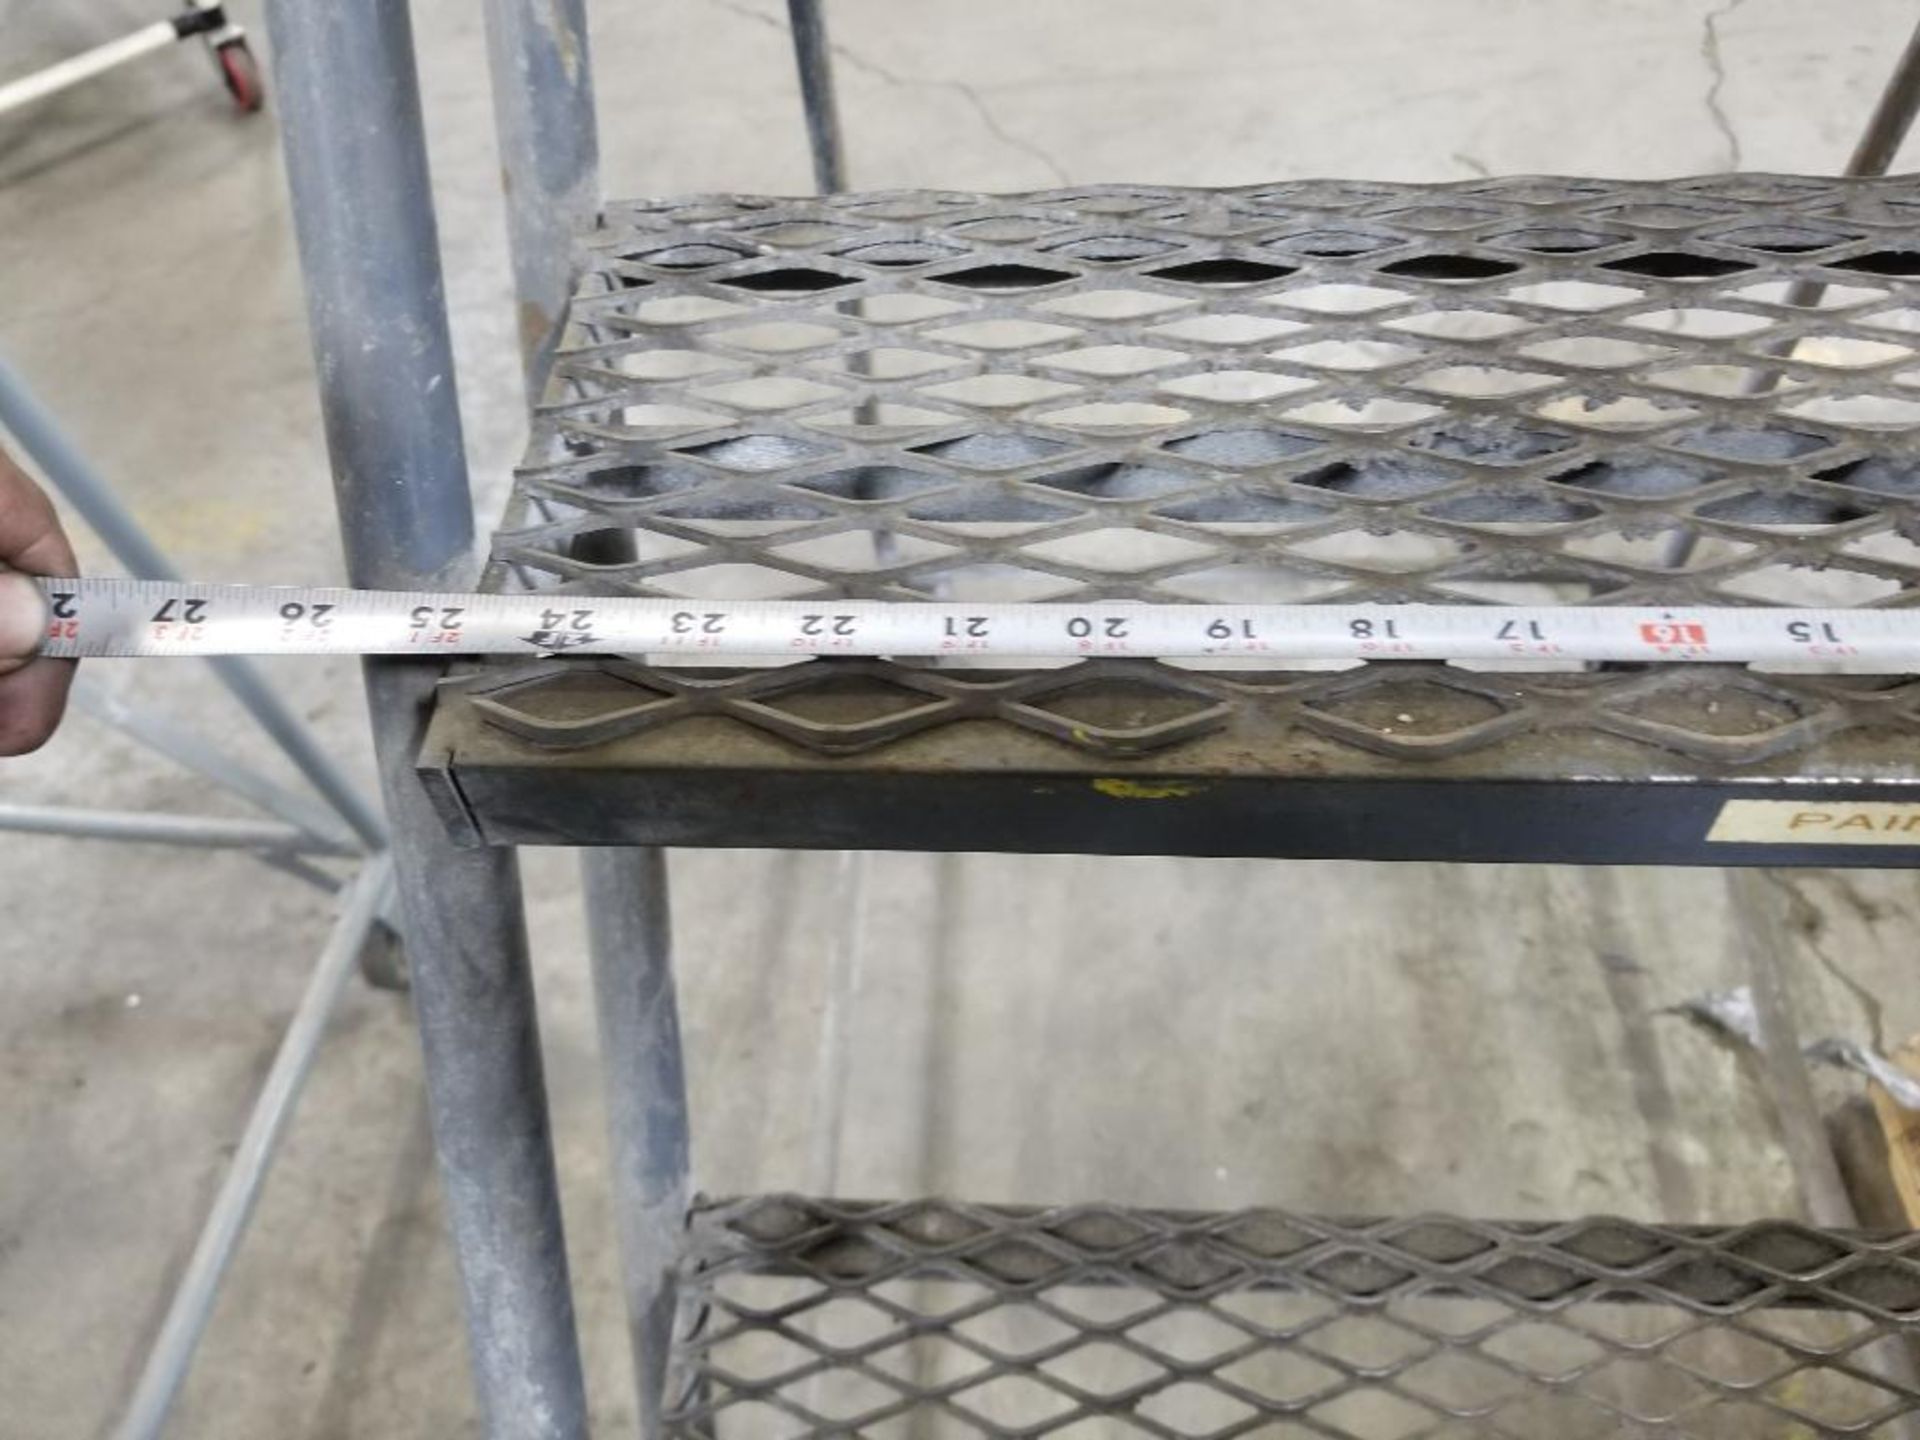 7 step Ballymore rolling ladder. - Image 4 of 4